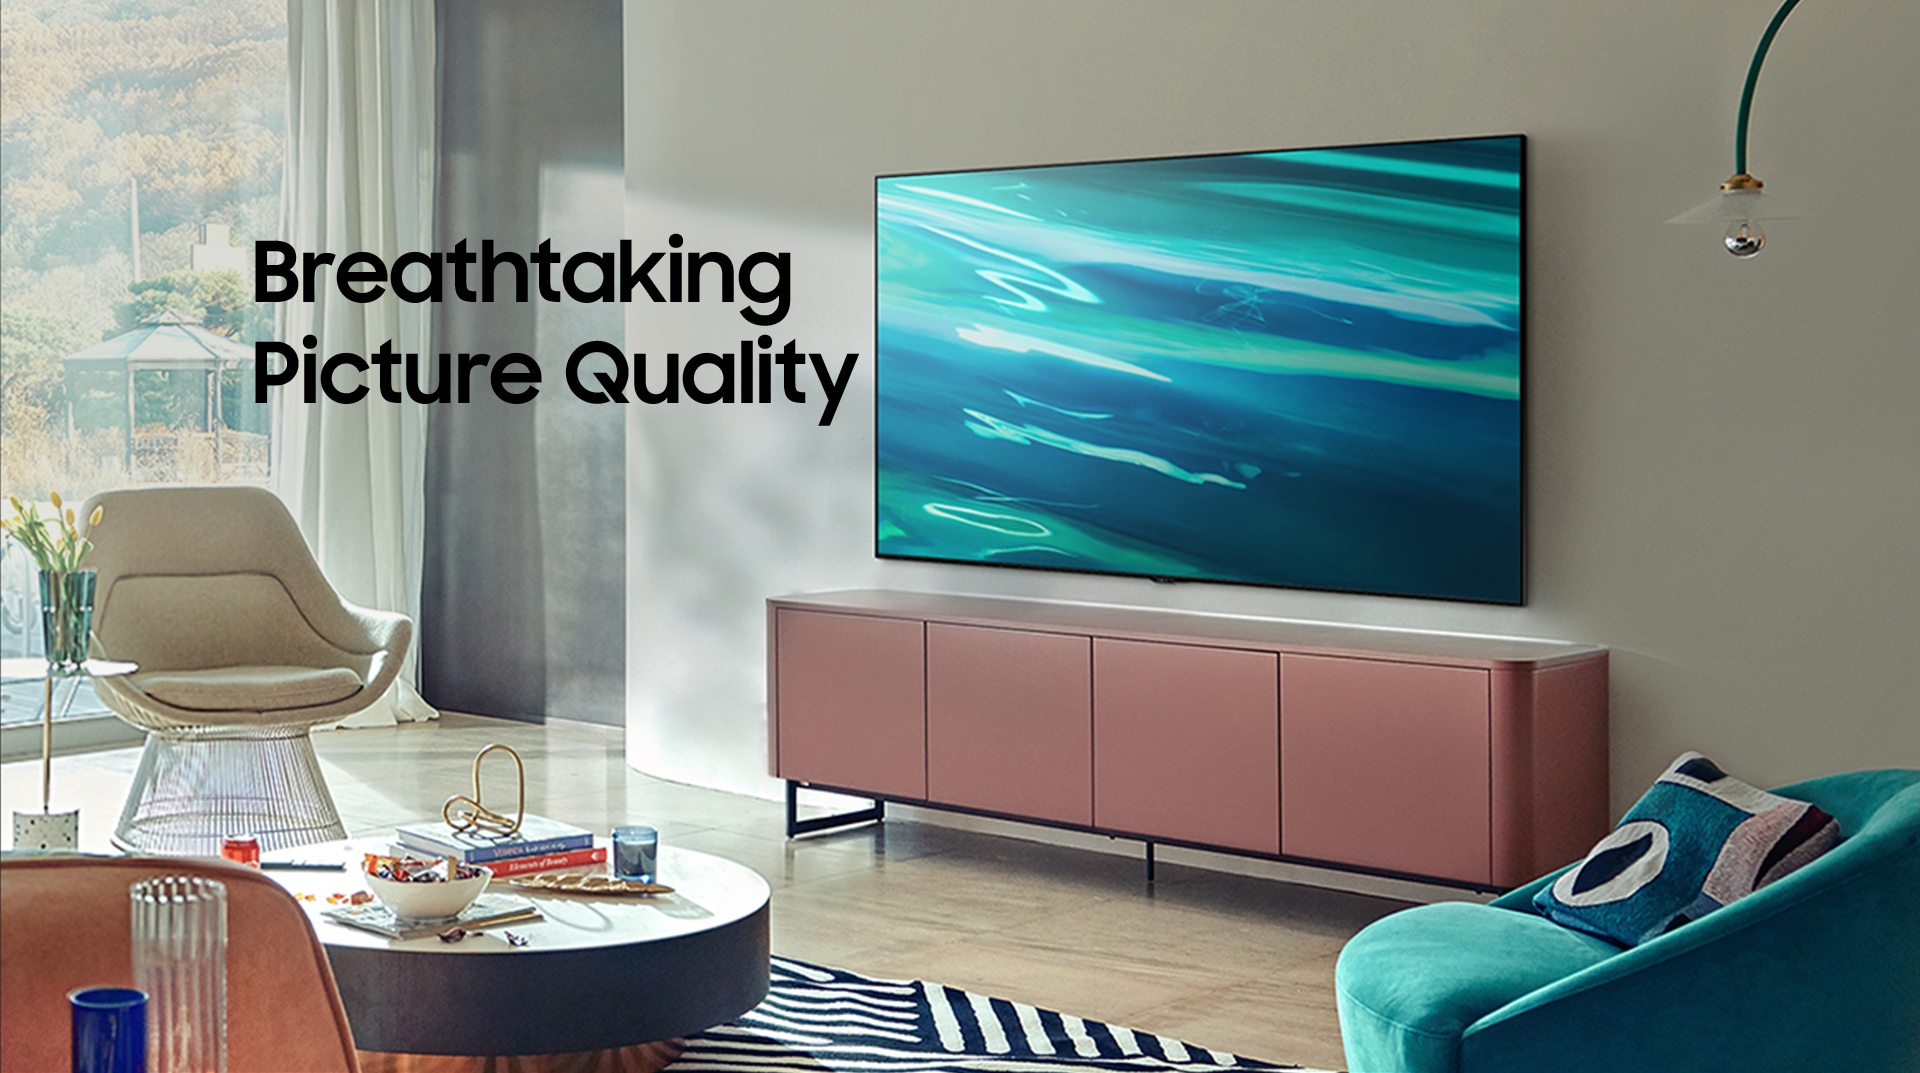 QLED 4K - Breathtaking Picture Quality